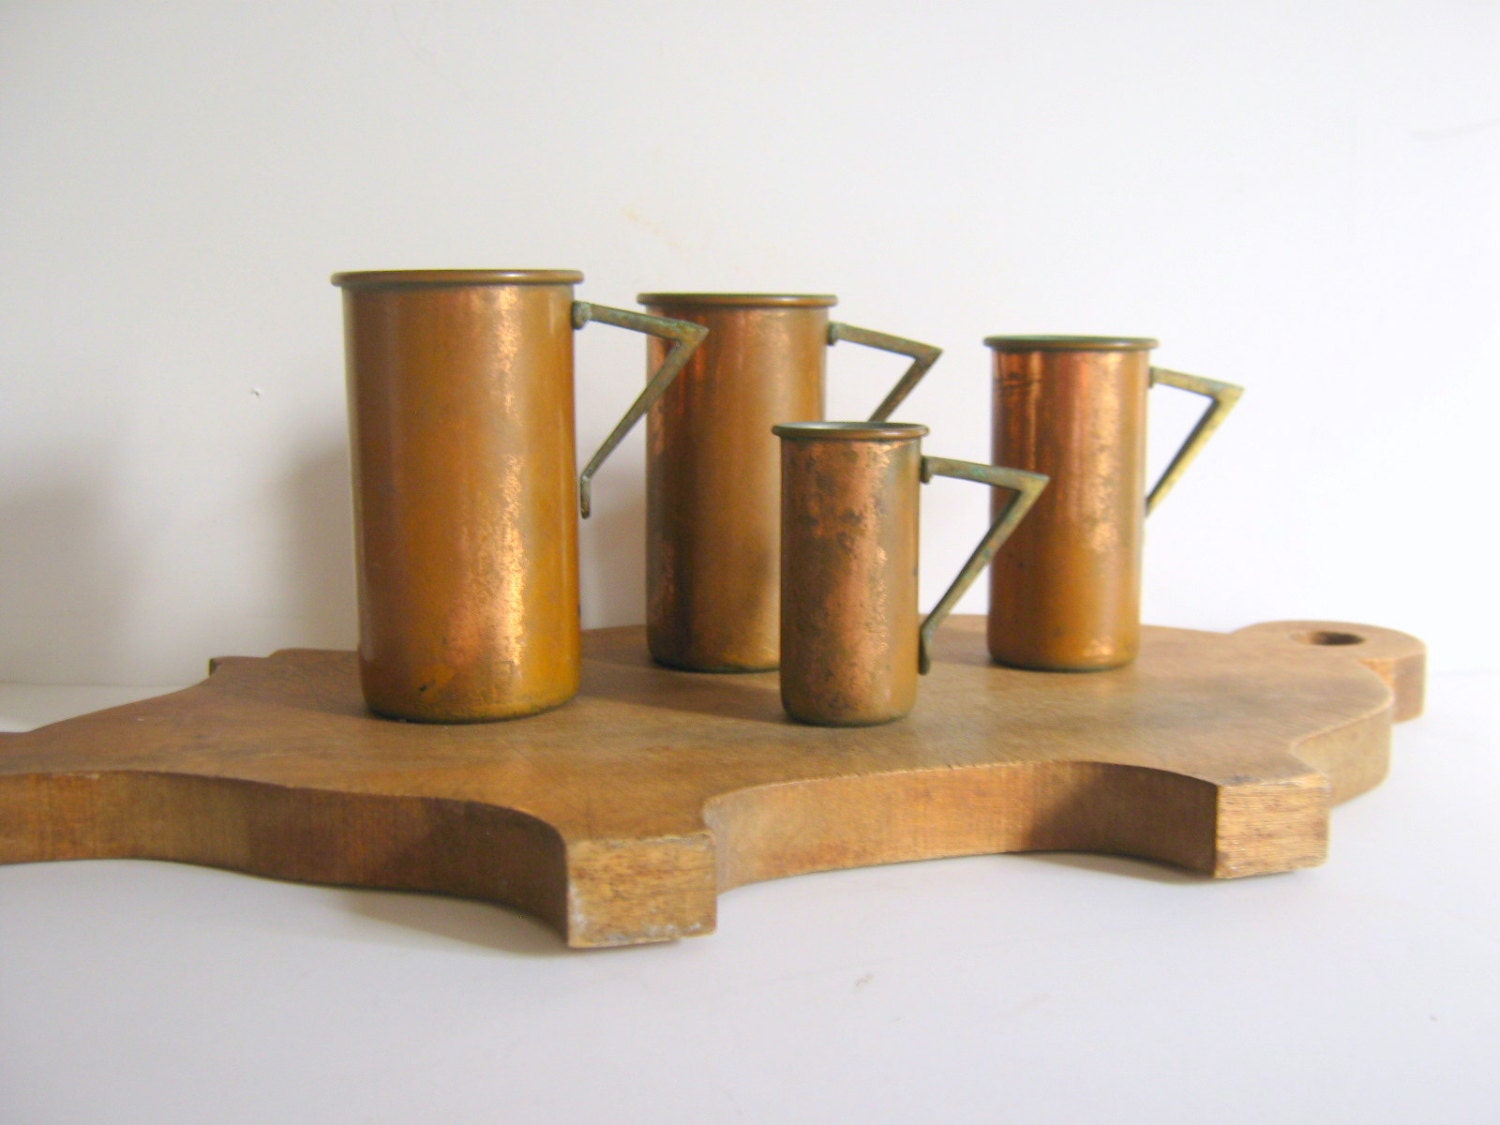 Four cups Century  brass of Measuring Mid Copper Set Cups  Handles Vintage Brass  vintage